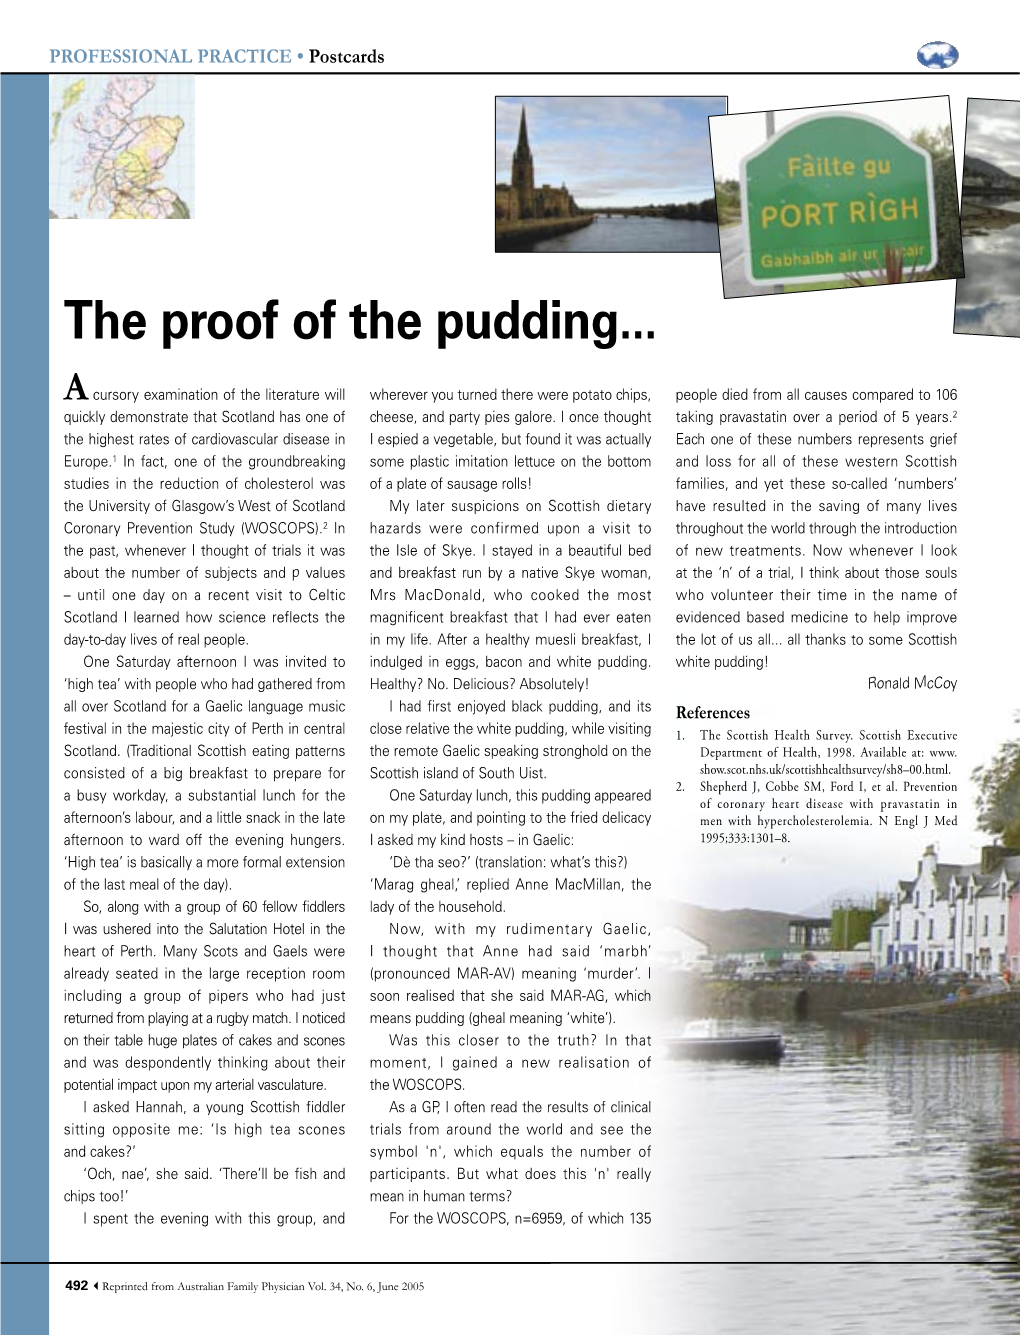 The Proof of the Pudding (Pdf 59KB)